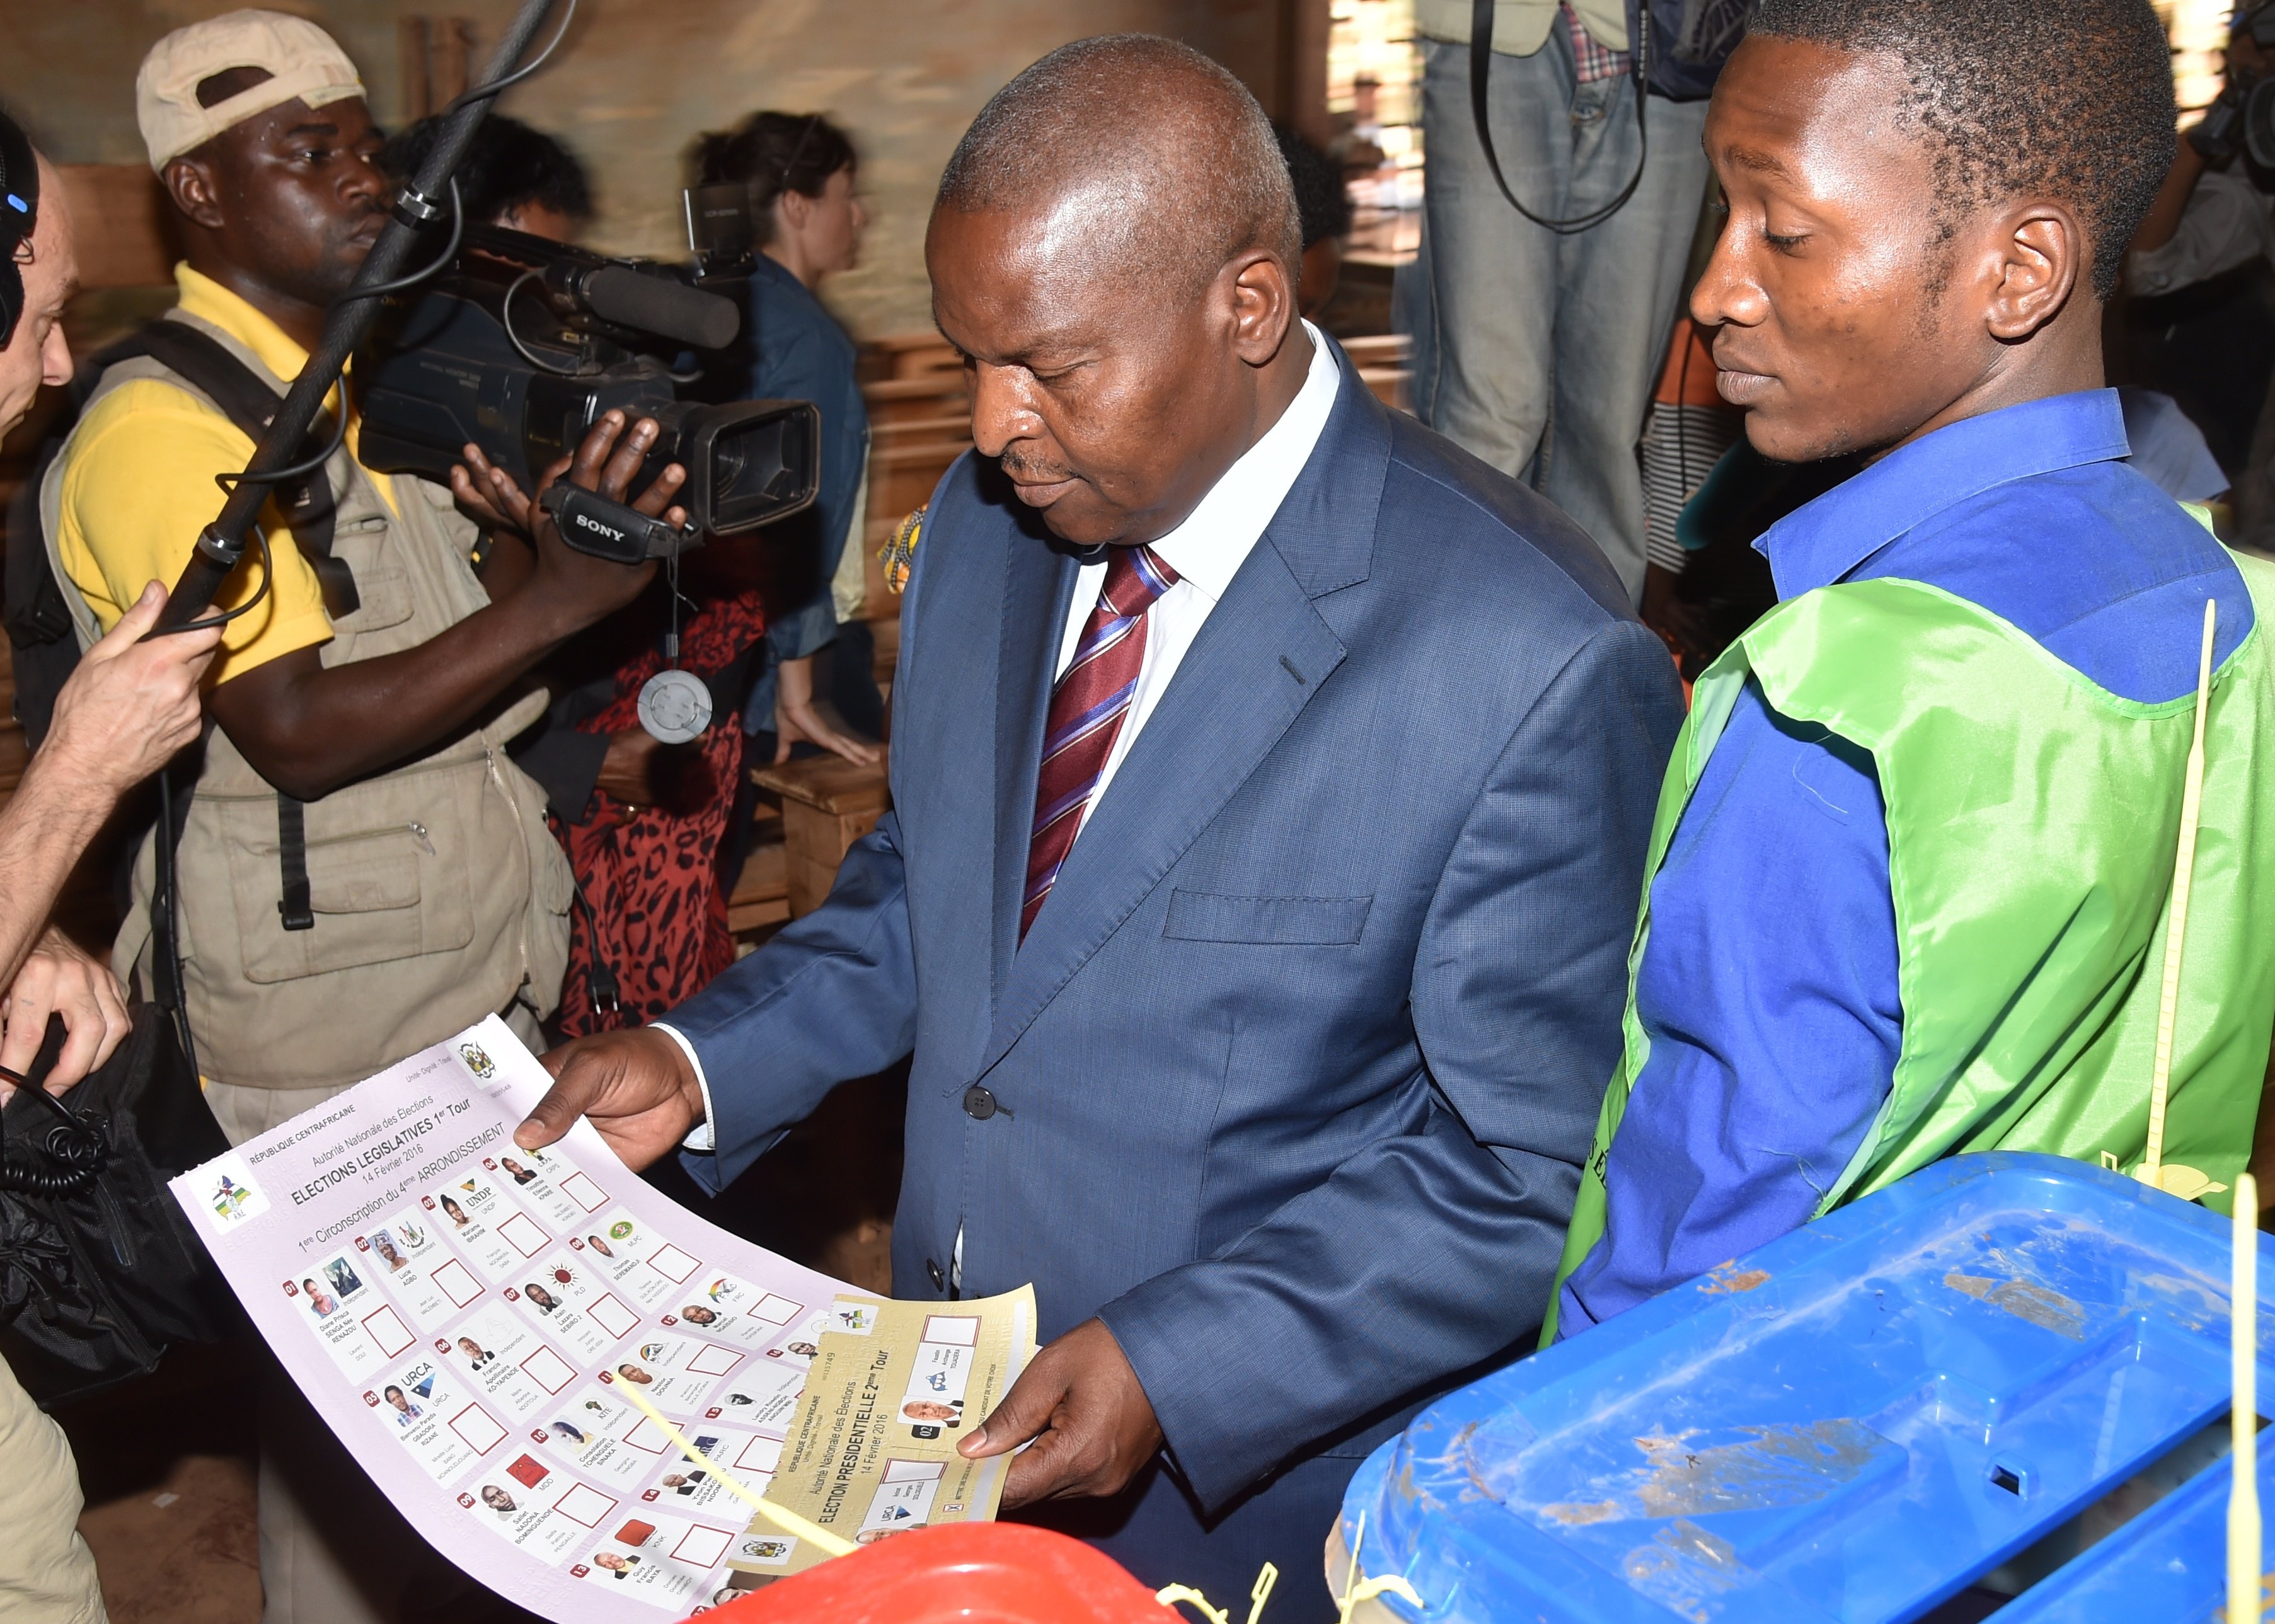 Central African Republic second round presidential candidate Faustin Archange Touadera (C) looks at a ballot before voting for delayed legislative elections and a presidential run-off, at a polling station in Bangui, on Feb. 14, 2016.